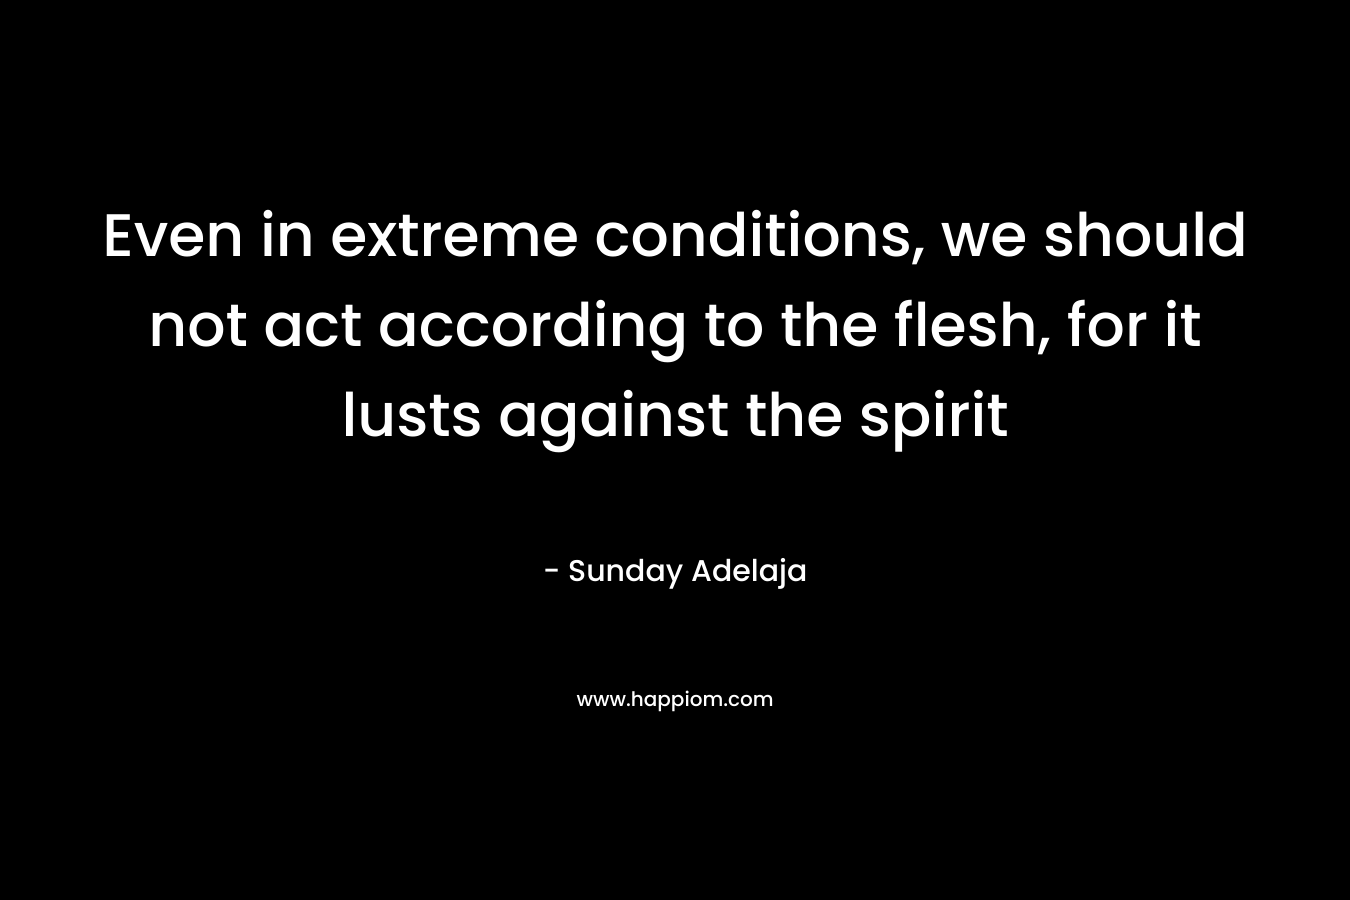 Even in extreme conditions, we should not act according to the flesh, for it lusts against the spirit